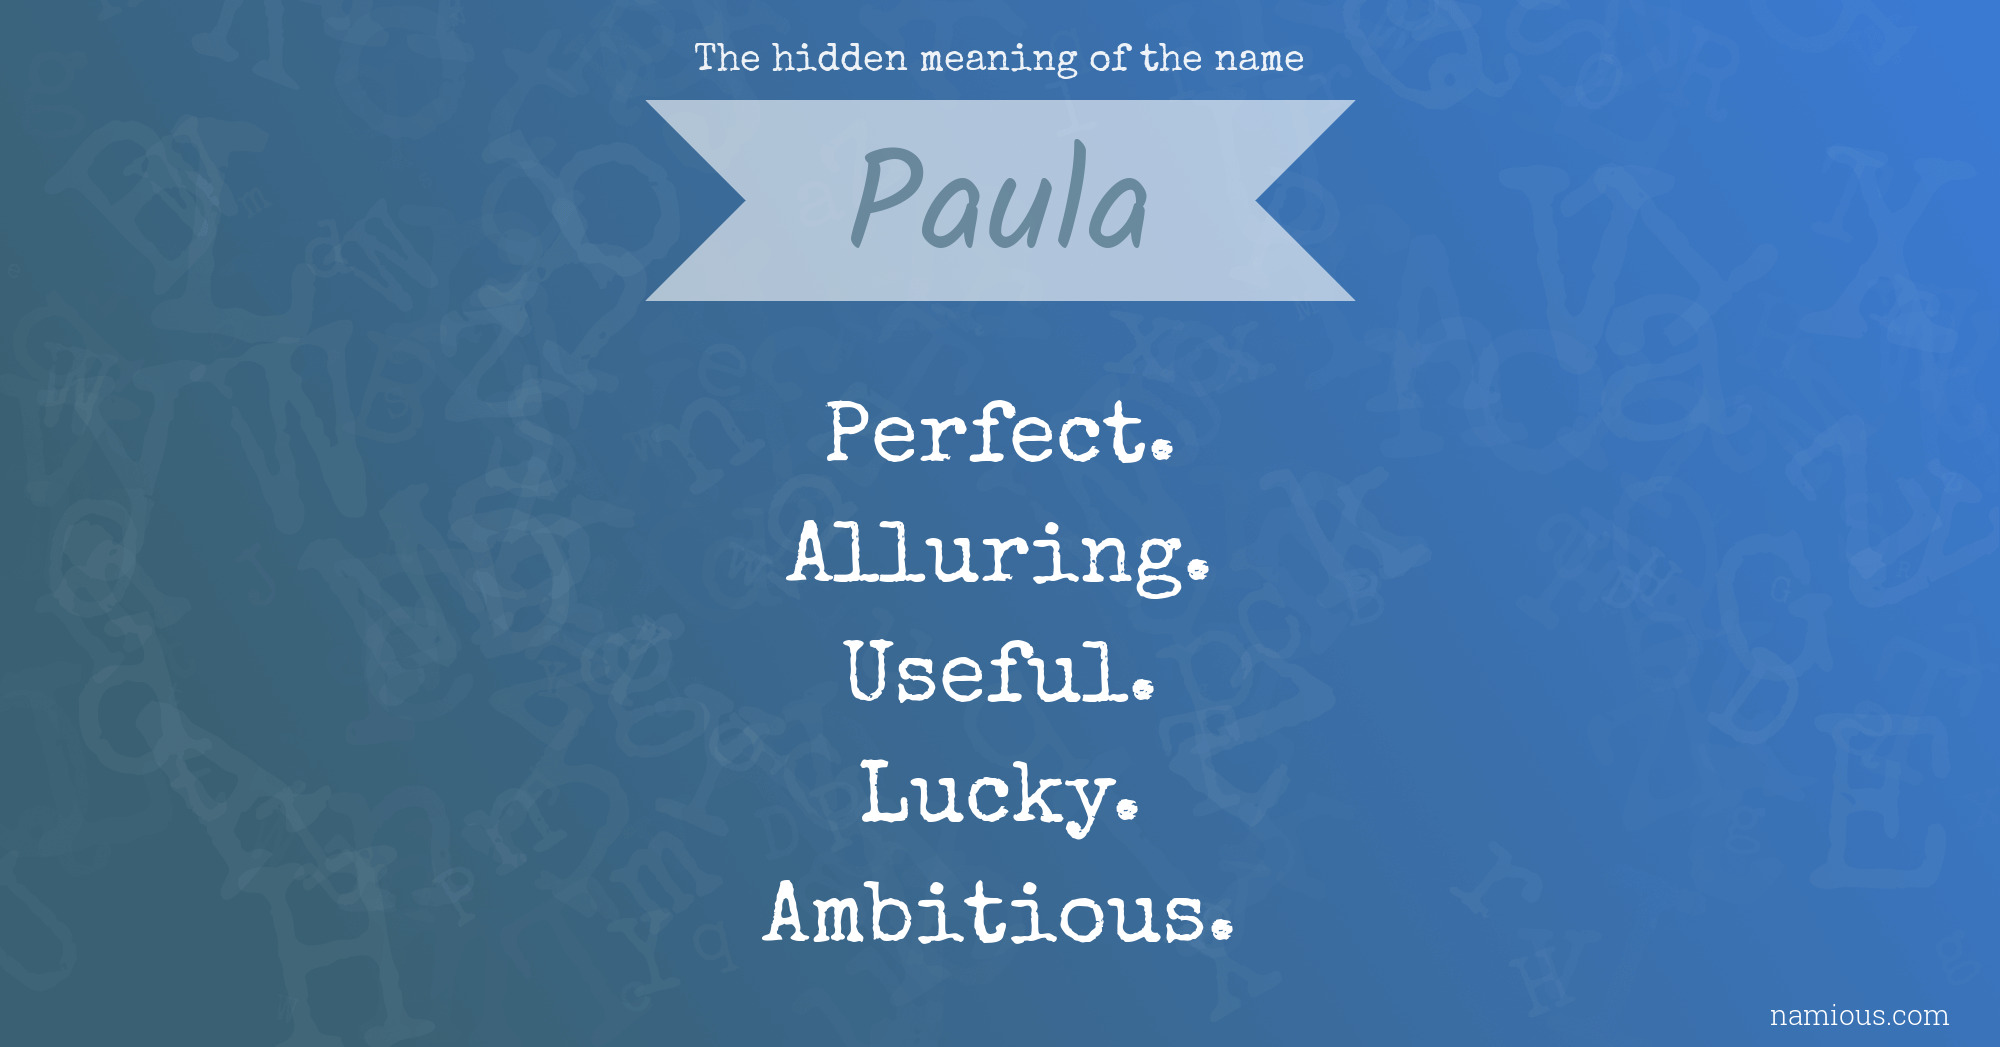 The hidden meaning of the name Paula